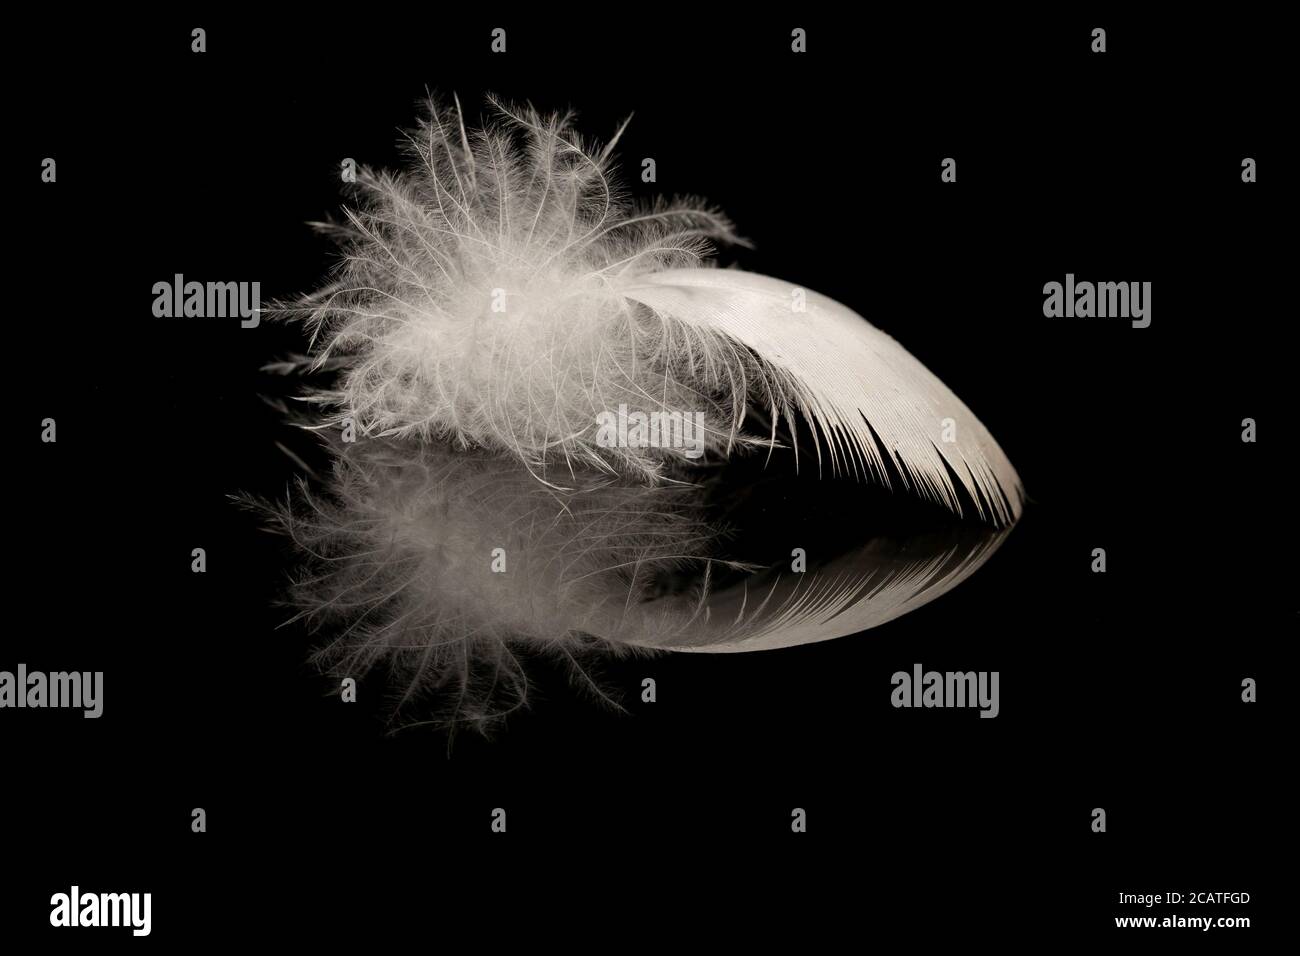 One white bird’s feather on a black reflective surface Stock Photo